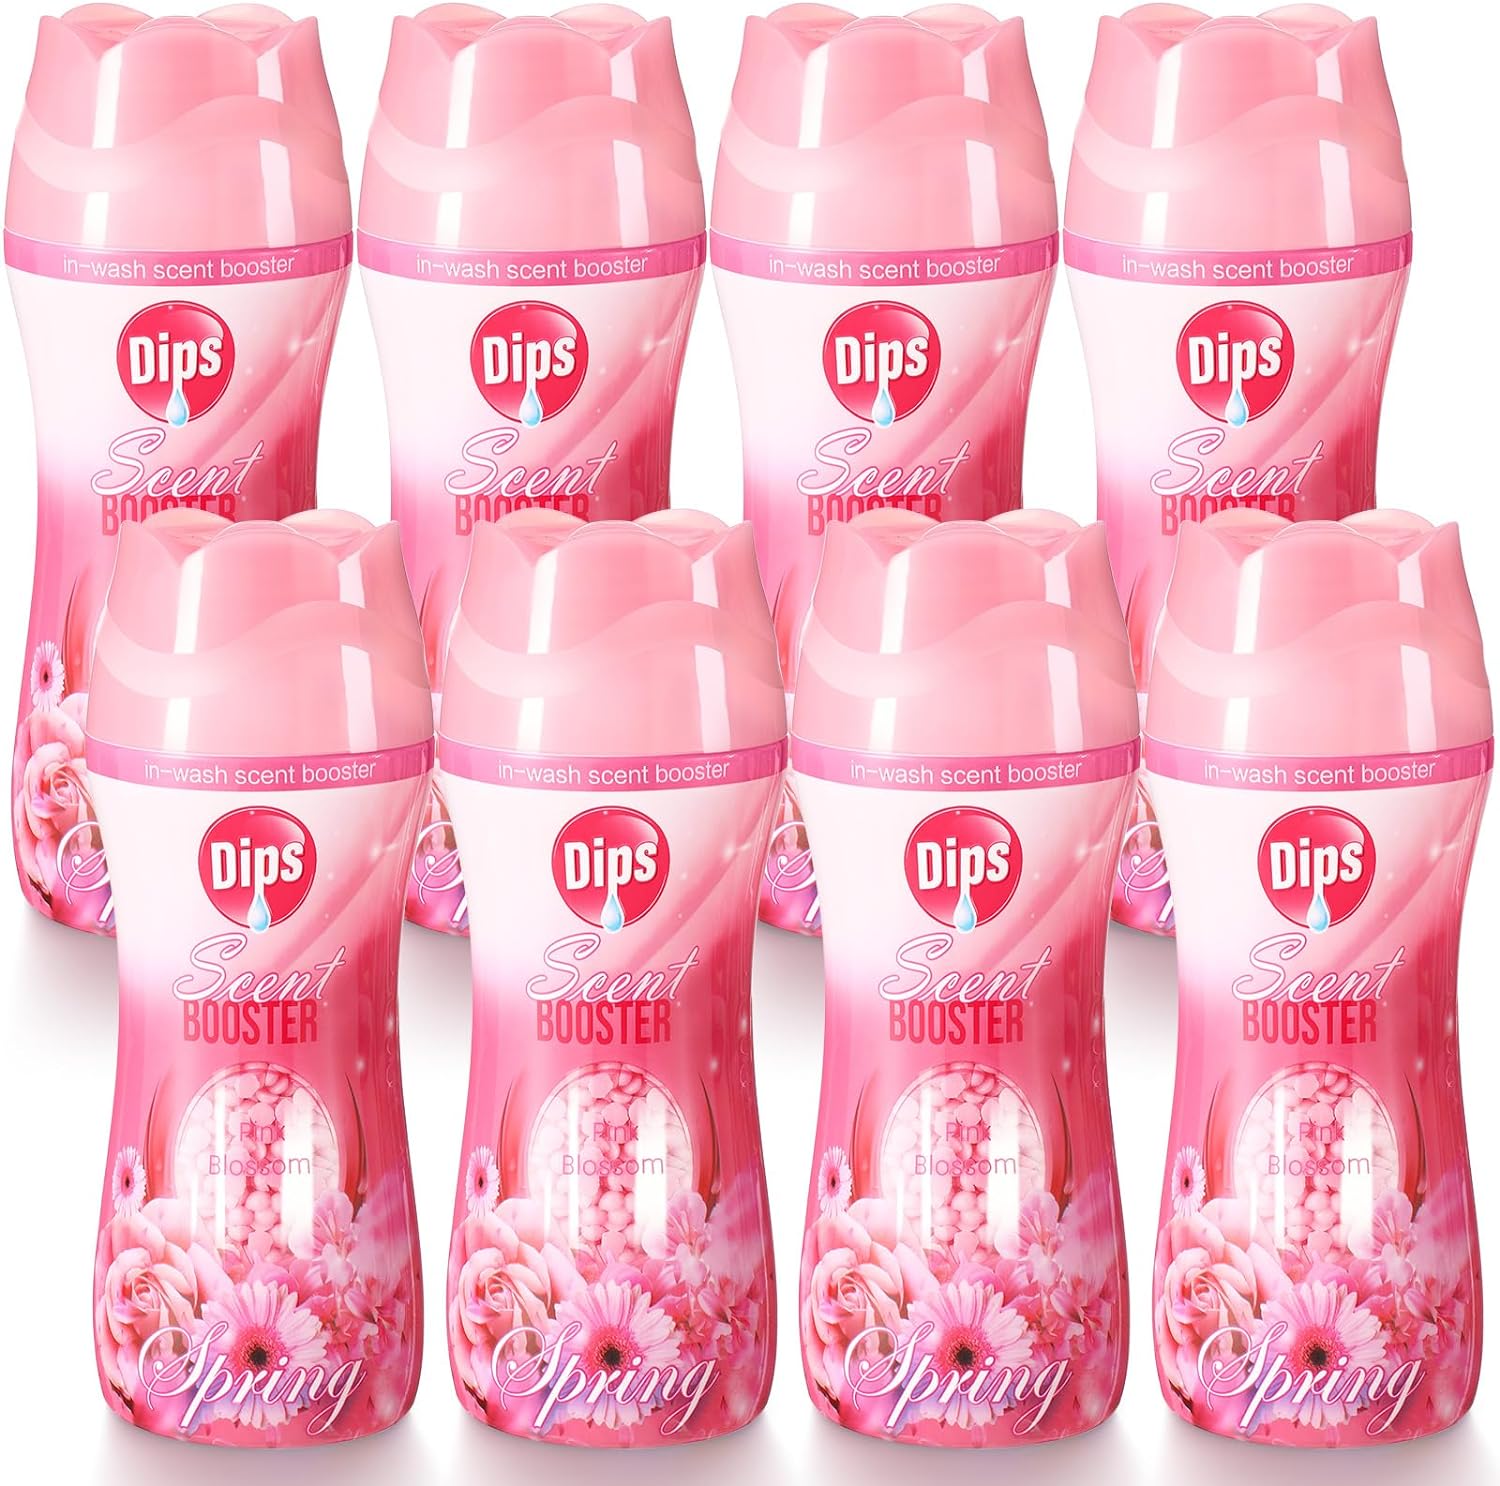 Swiffen 8 Pack In Wash Scent Booster Beads 73.6 oz Laundry Scent Boosters Laundry Scent Beads(Pink Blossom)